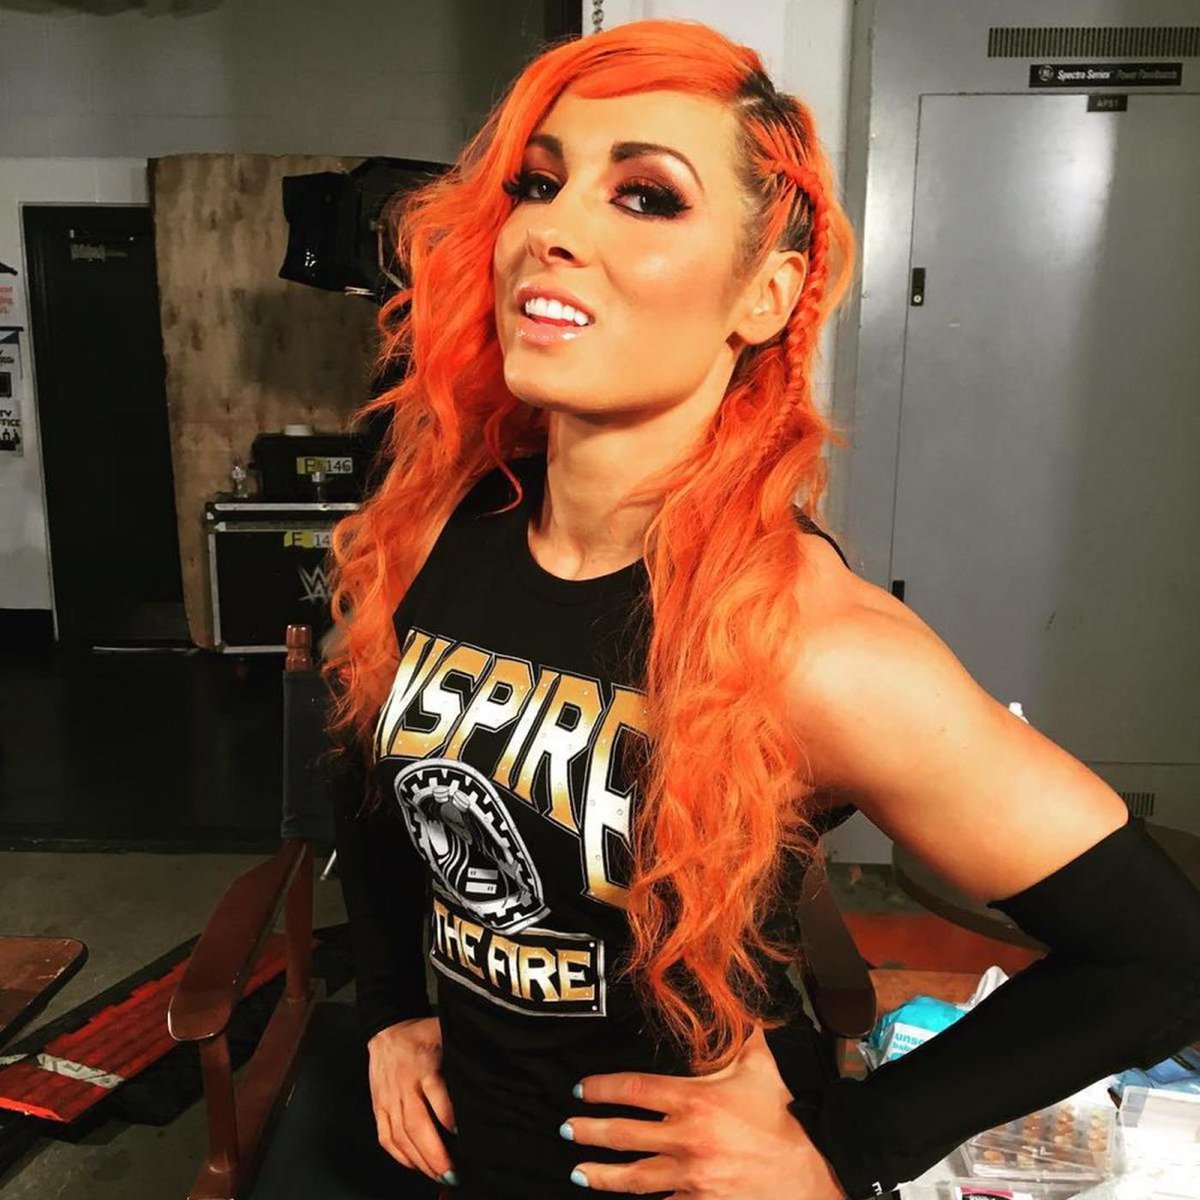 Day 179 of missing Becky Lynch from our screens!